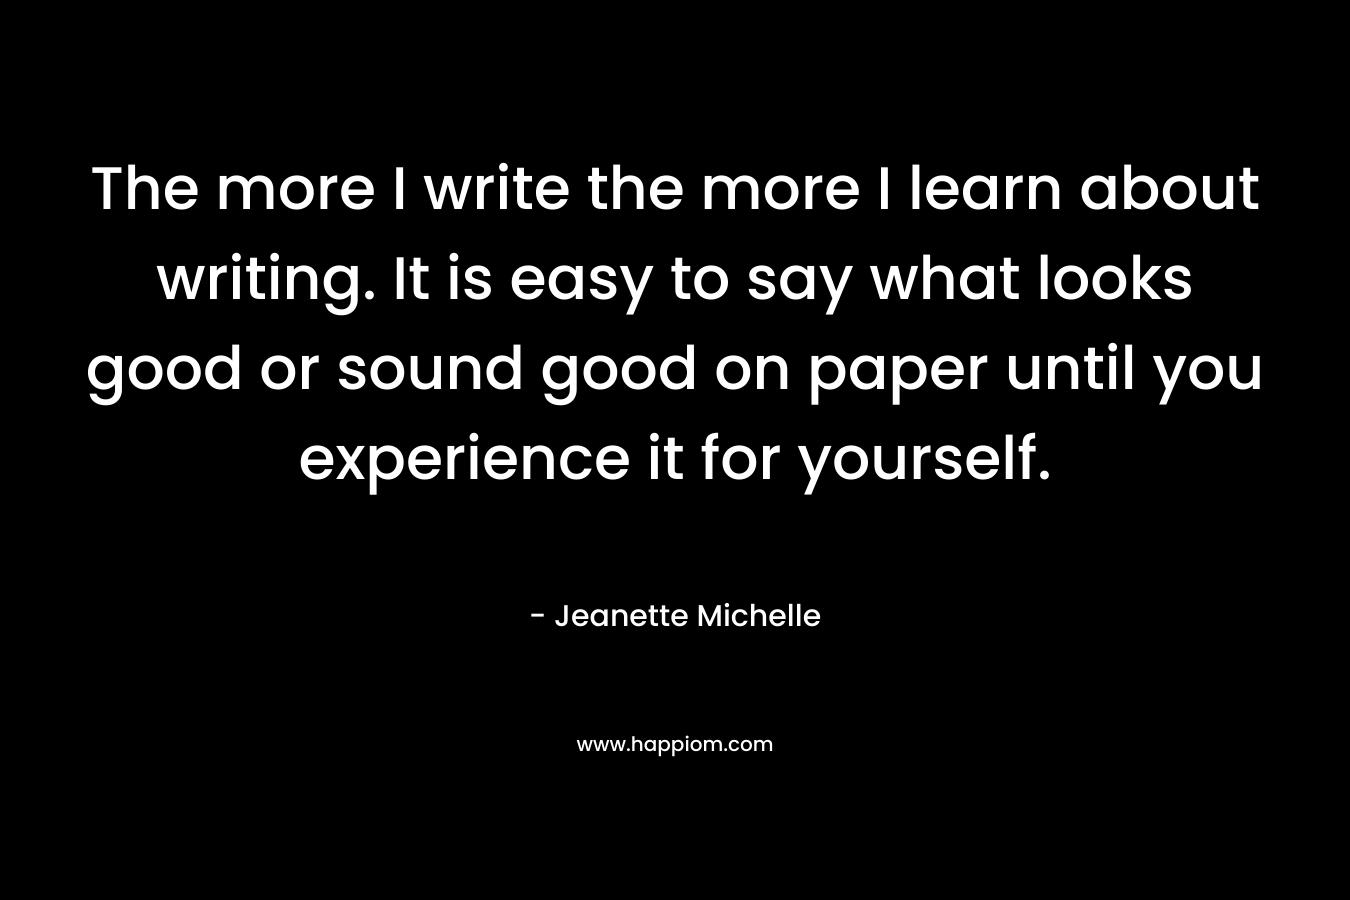 The more I write the more I learn about writing. It is easy to say what looks good or sound good on paper until you experience it for yourself.